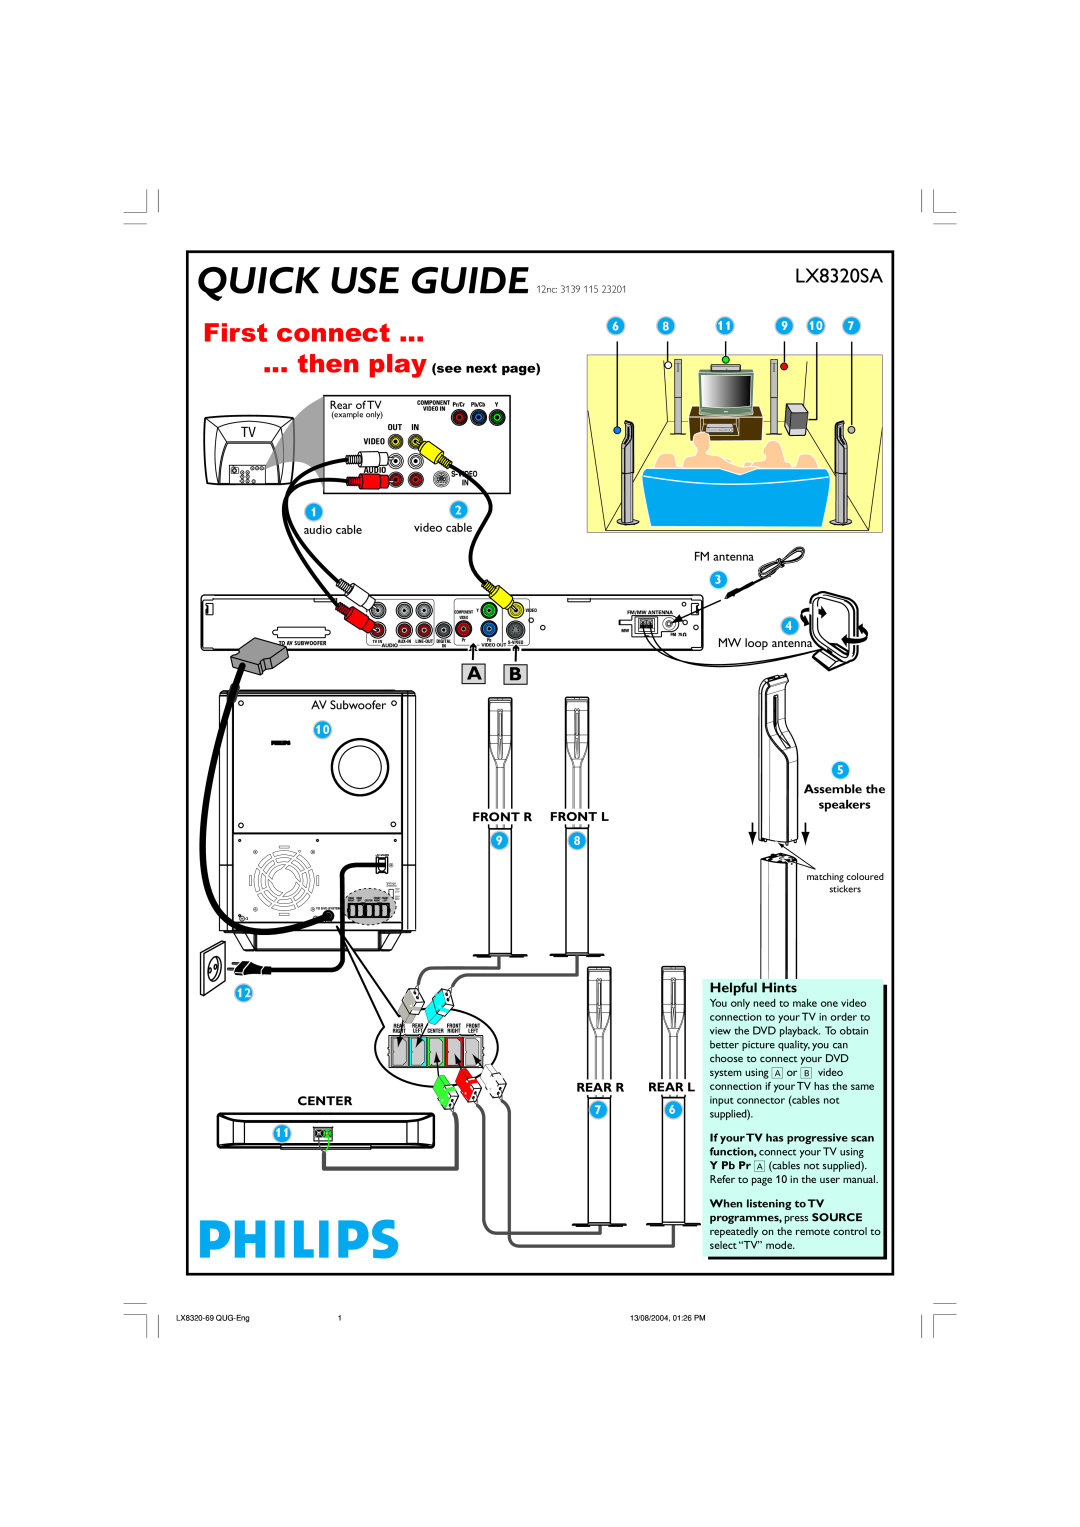 Philips LX8320SA Quick Use Guide, First connect, Helpful Hints, audio cable, video cable, Assemble the, Front R, Front L 